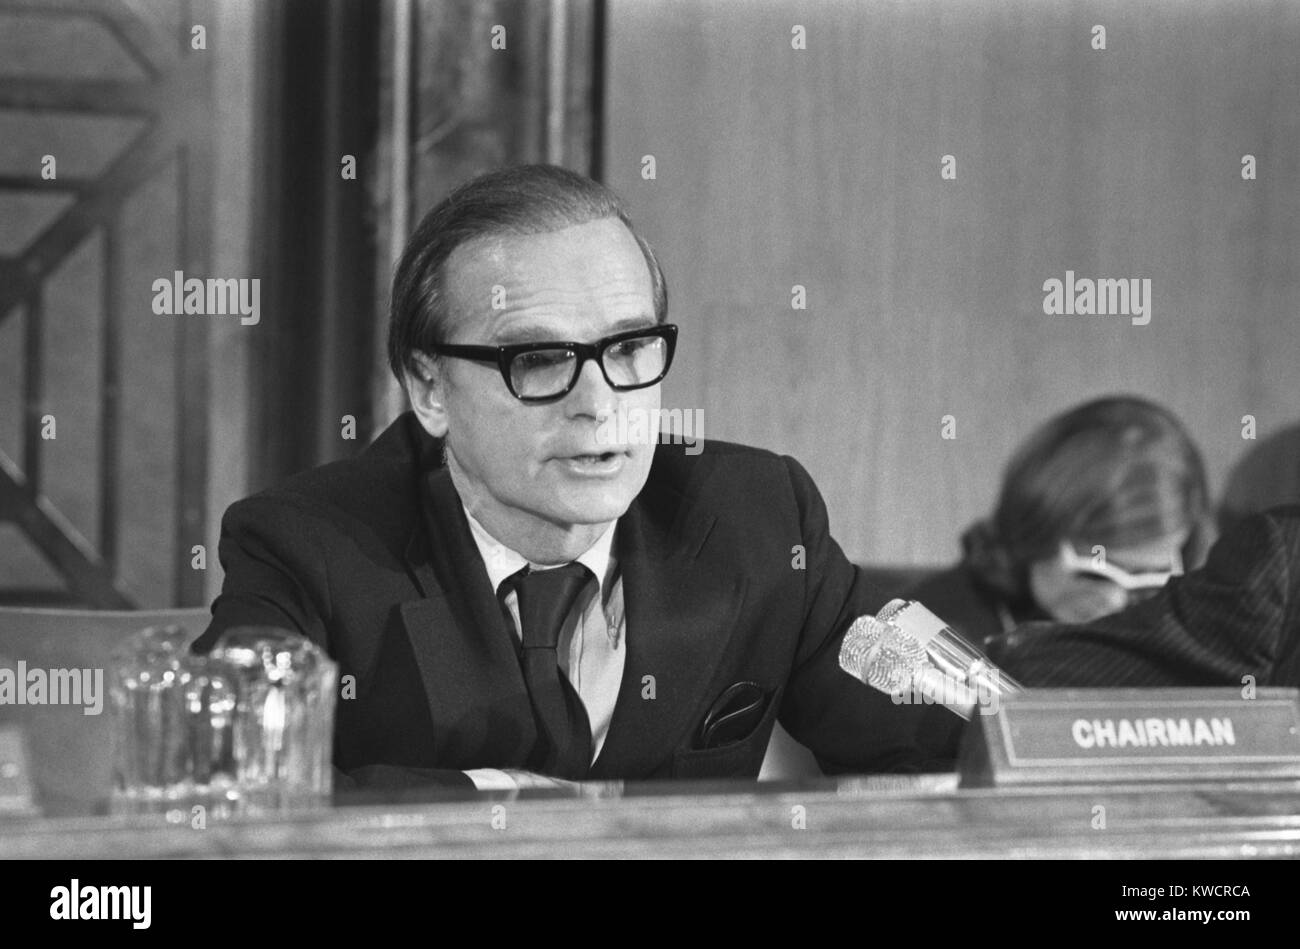 Alan Greenspan testifying before a joint House-Senate Economic Committee, Jan. 6, 1975. Greenspan was then Chairman of the Council of Economic Advisers. - (BSLOC 2015 1 105) Stock Photo